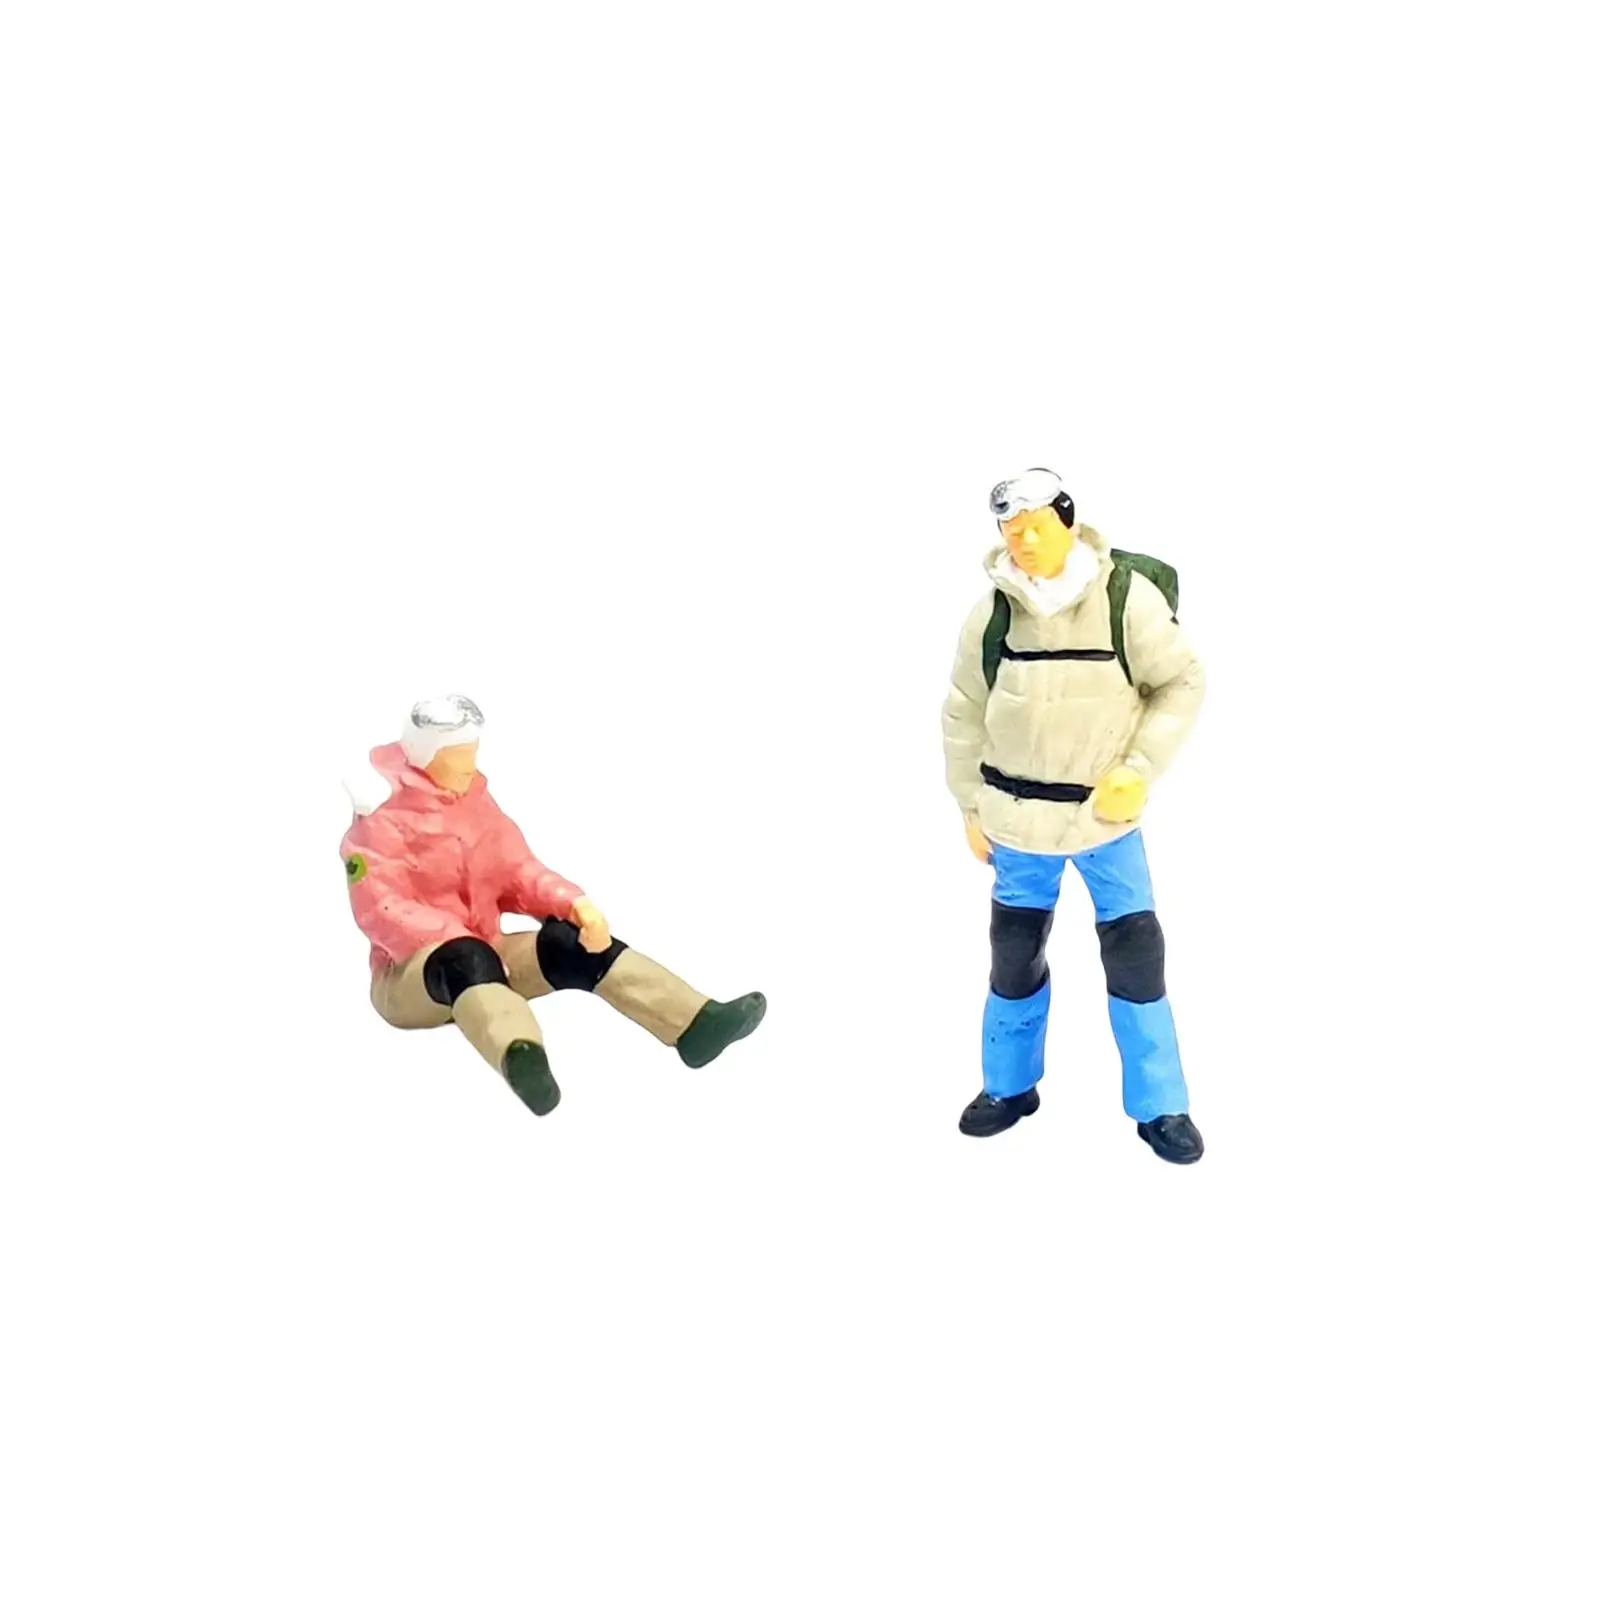 2x Sporting Painted Figures Tiny People Toys Miniature Scene People for Dollhouse DIY Projects